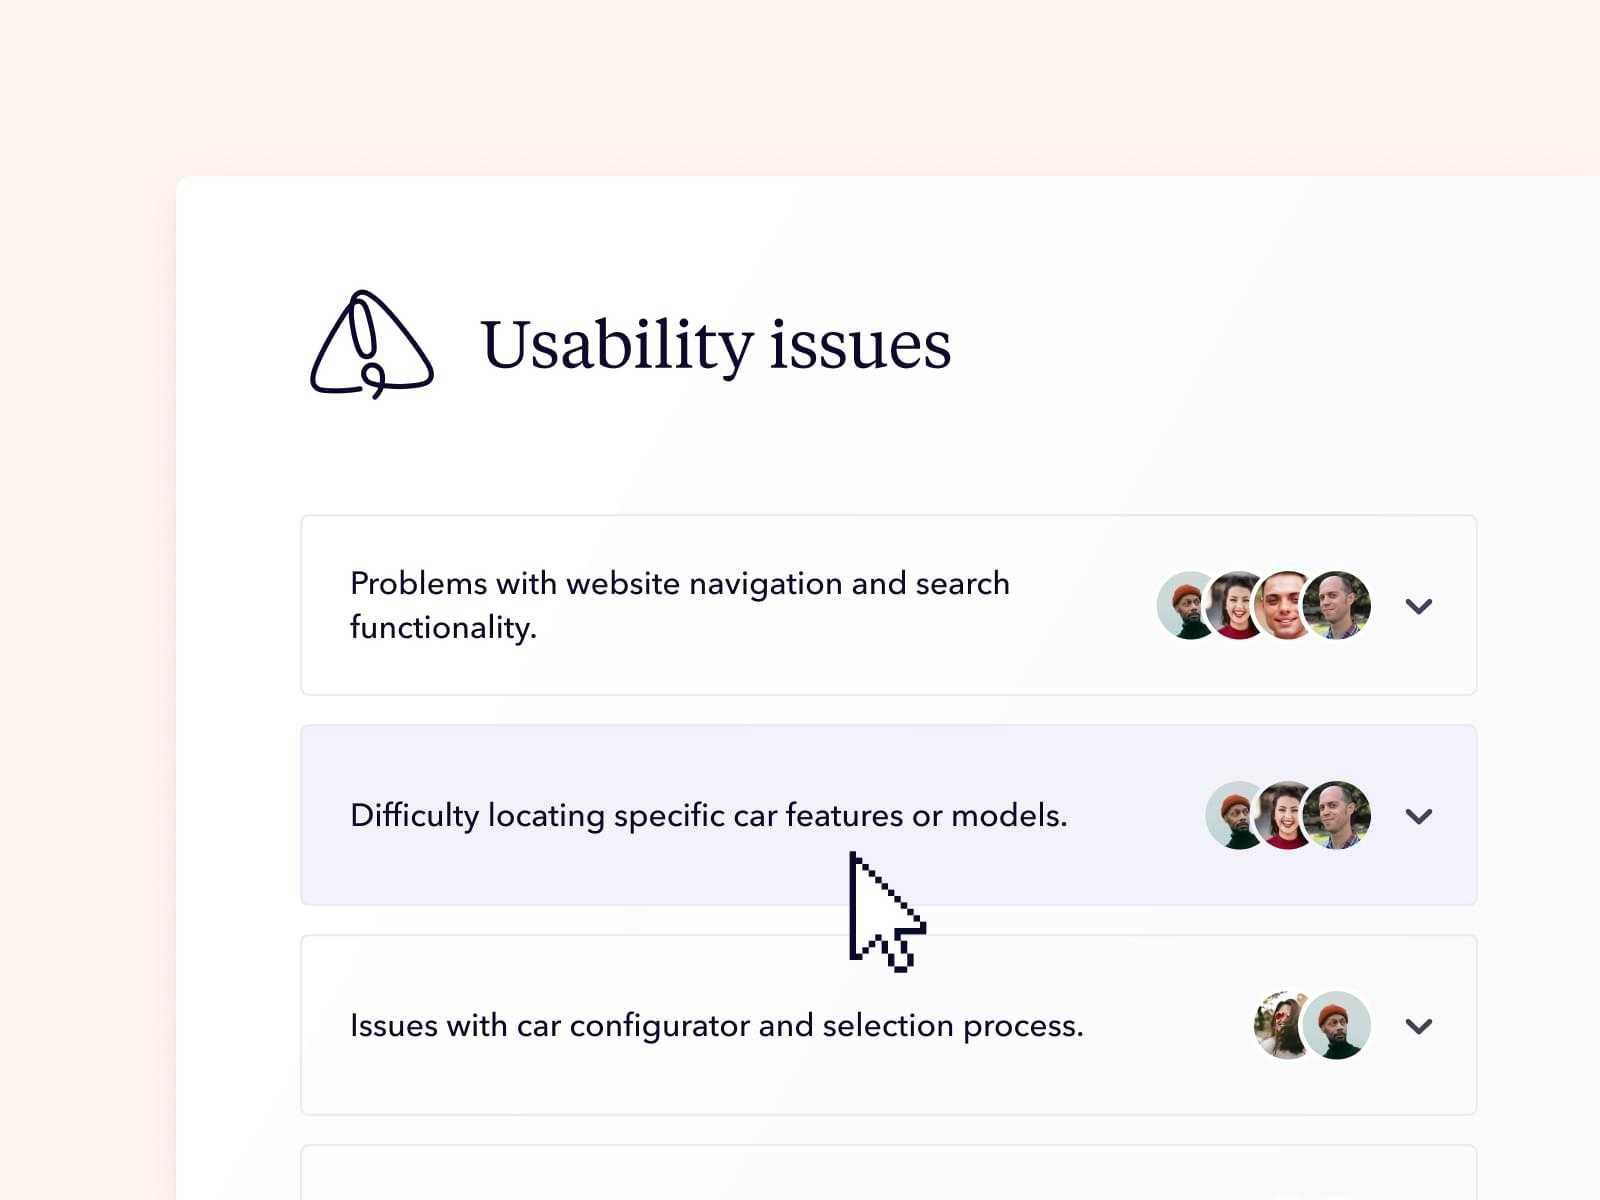 A list of usability issues